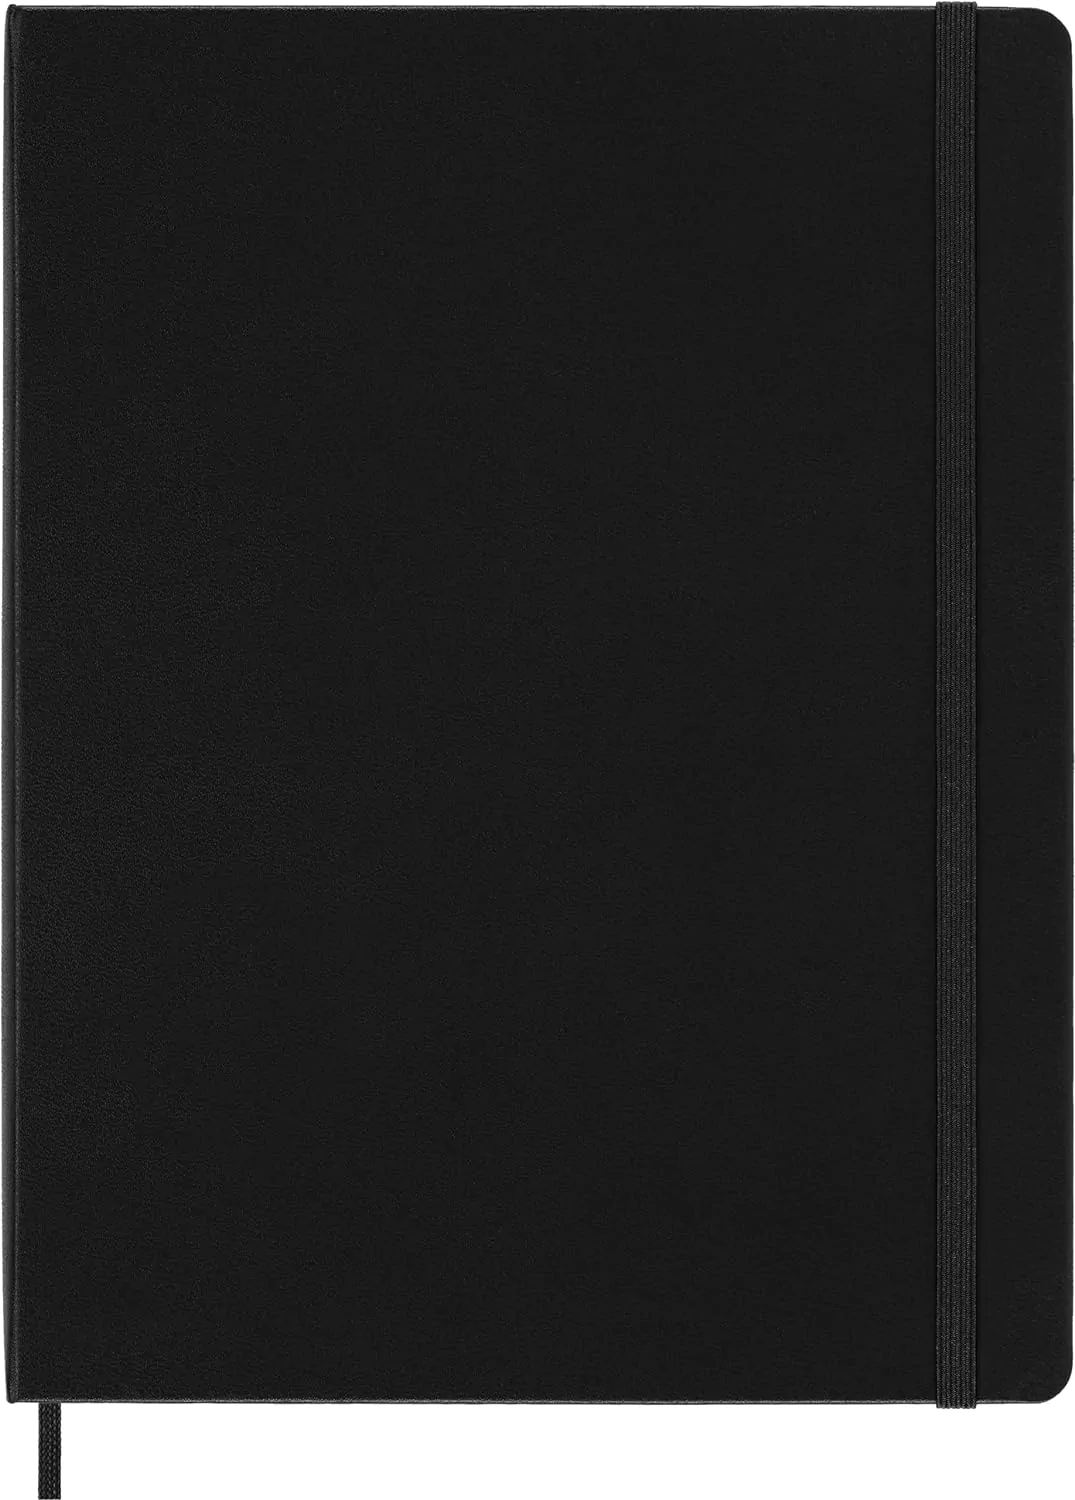 Moleskine Classic Notebook Hard Cover XL 7 5 x 9 5 RuledLined Black 192 Pages 1